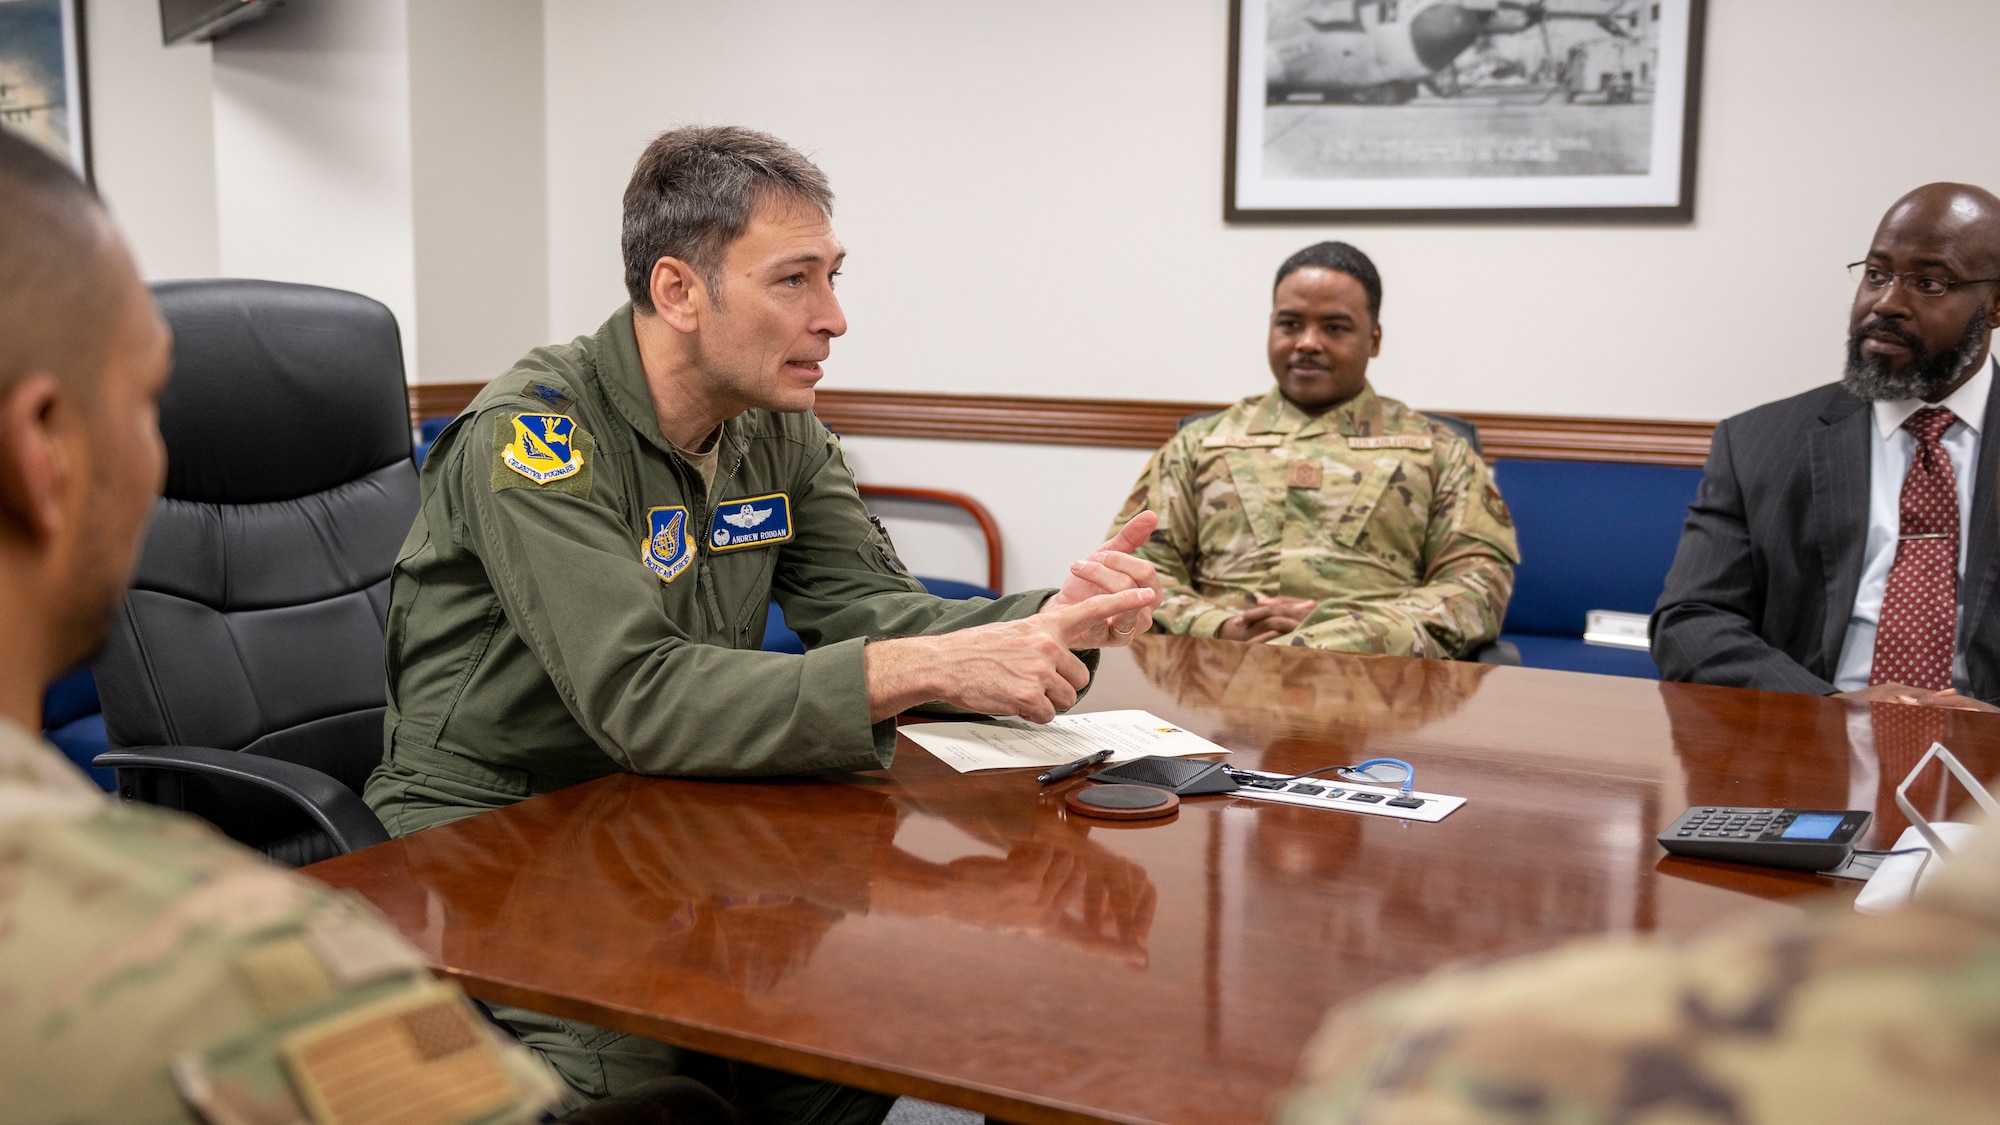 Commander speaks with representatives at a conference table